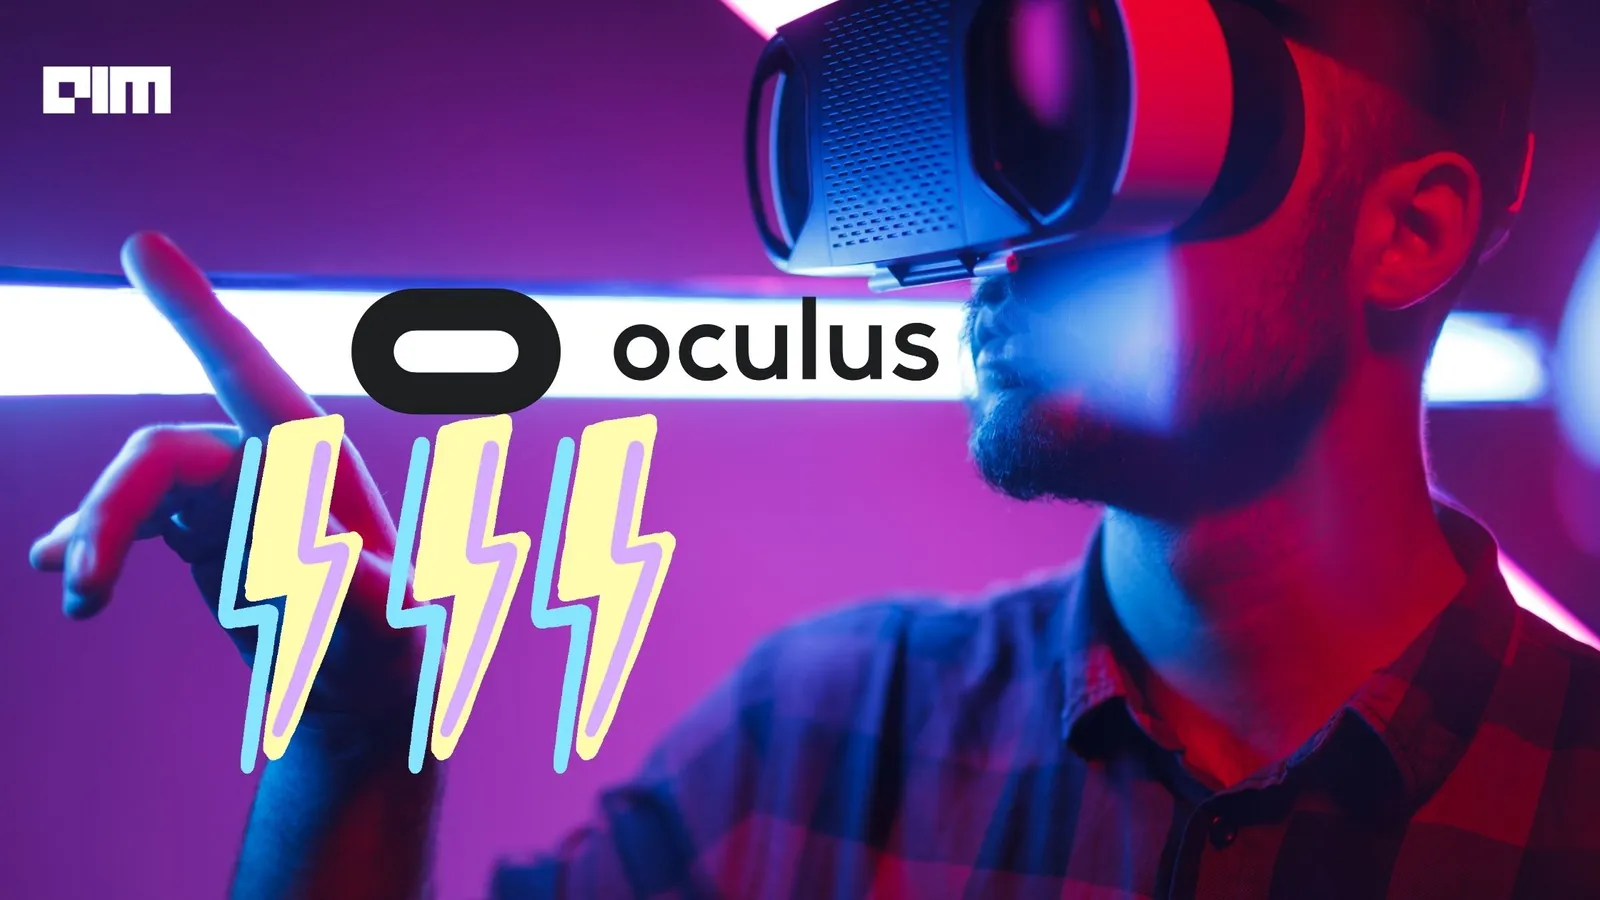 Does The Latest Emergence Of Oculus Impact Other Important Dimensions of VR?